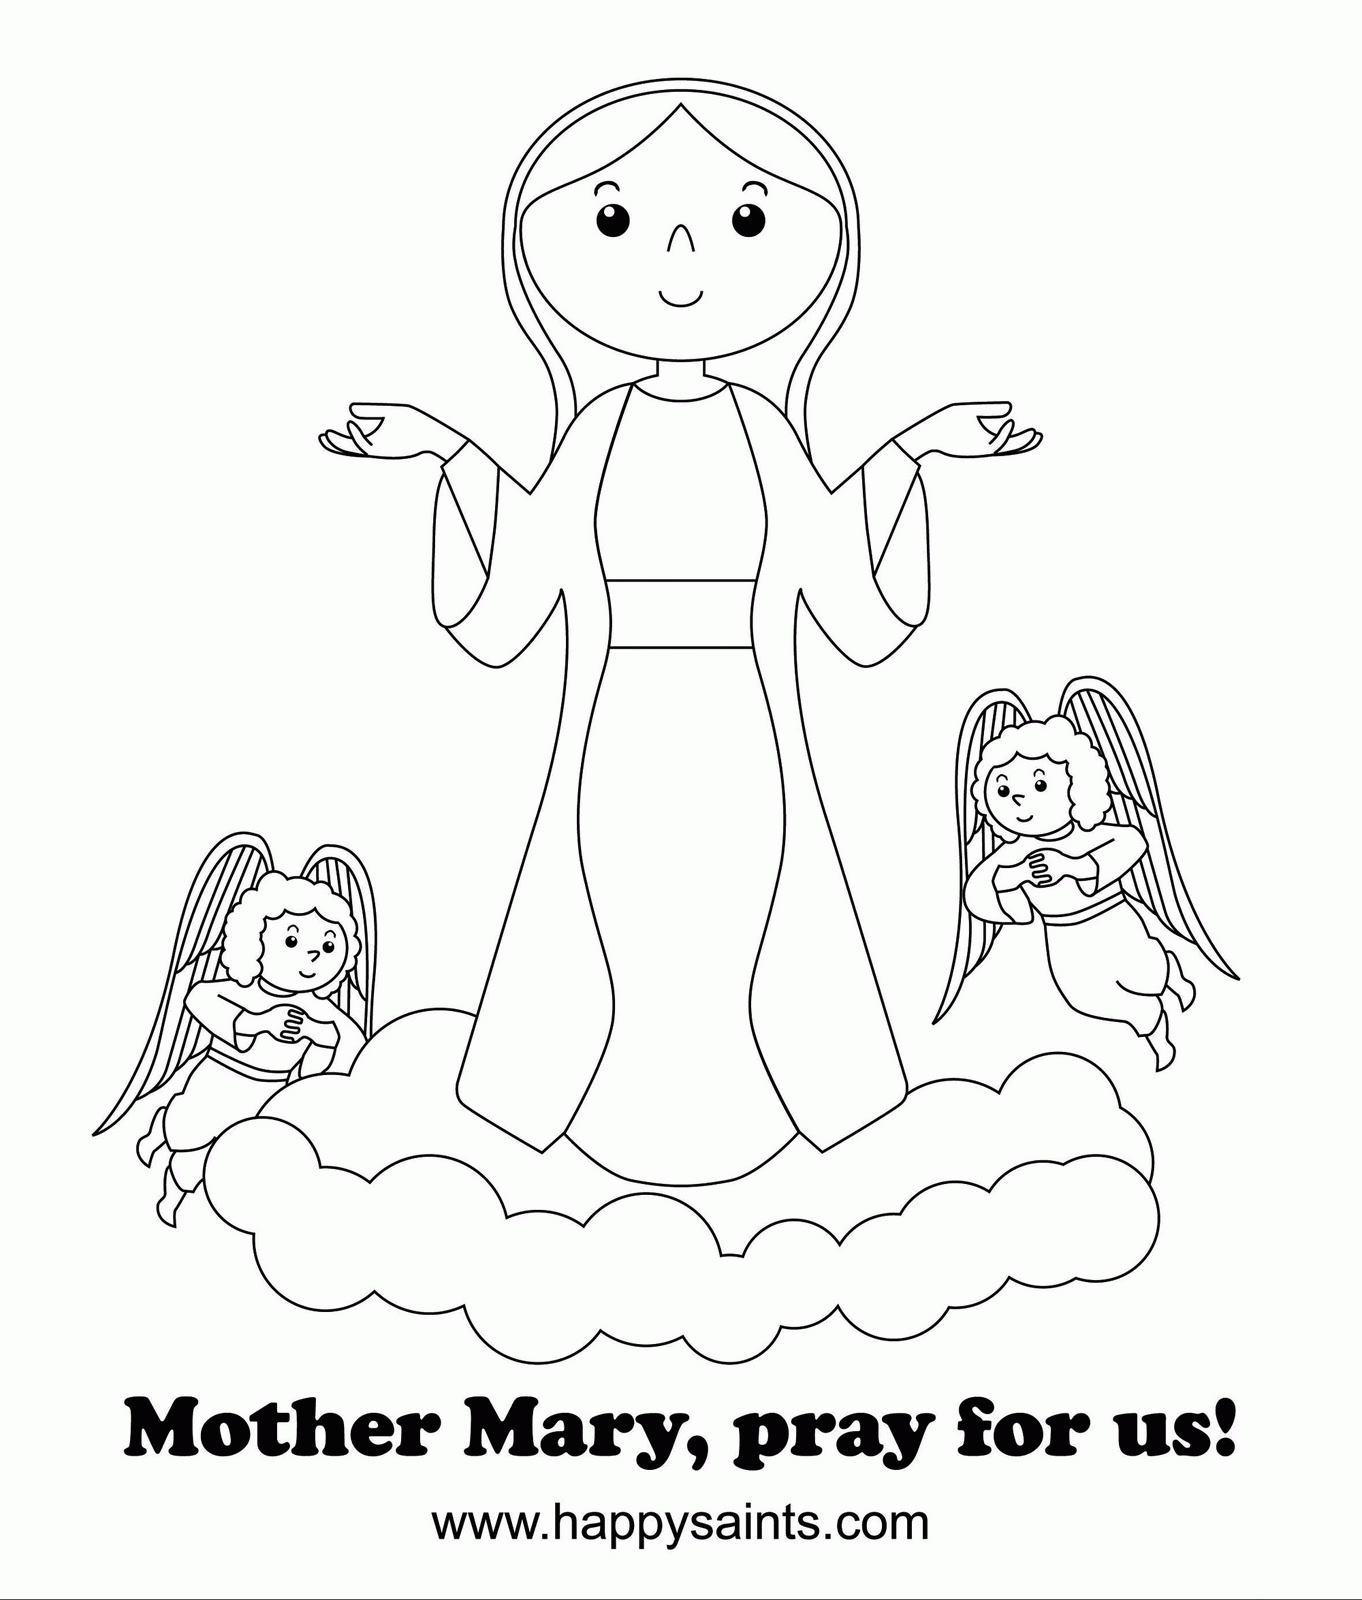 Happy Saints: Mother Mary Coloring Page